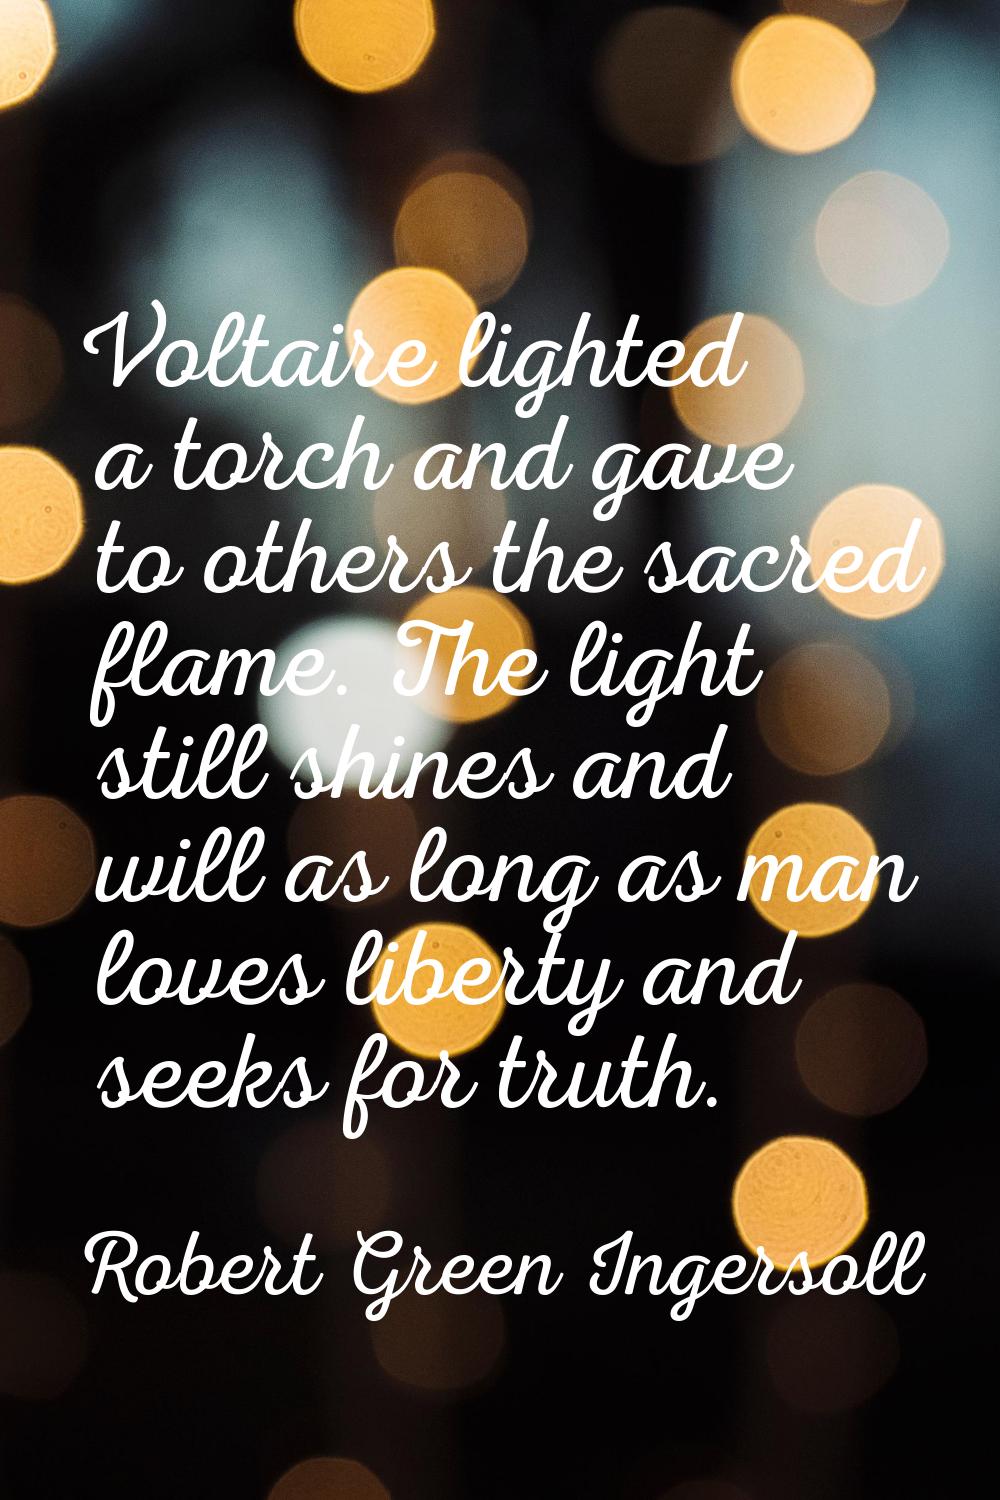 Voltaire lighted a torch and gave to others the sacred flame. The light still shines and will as lo